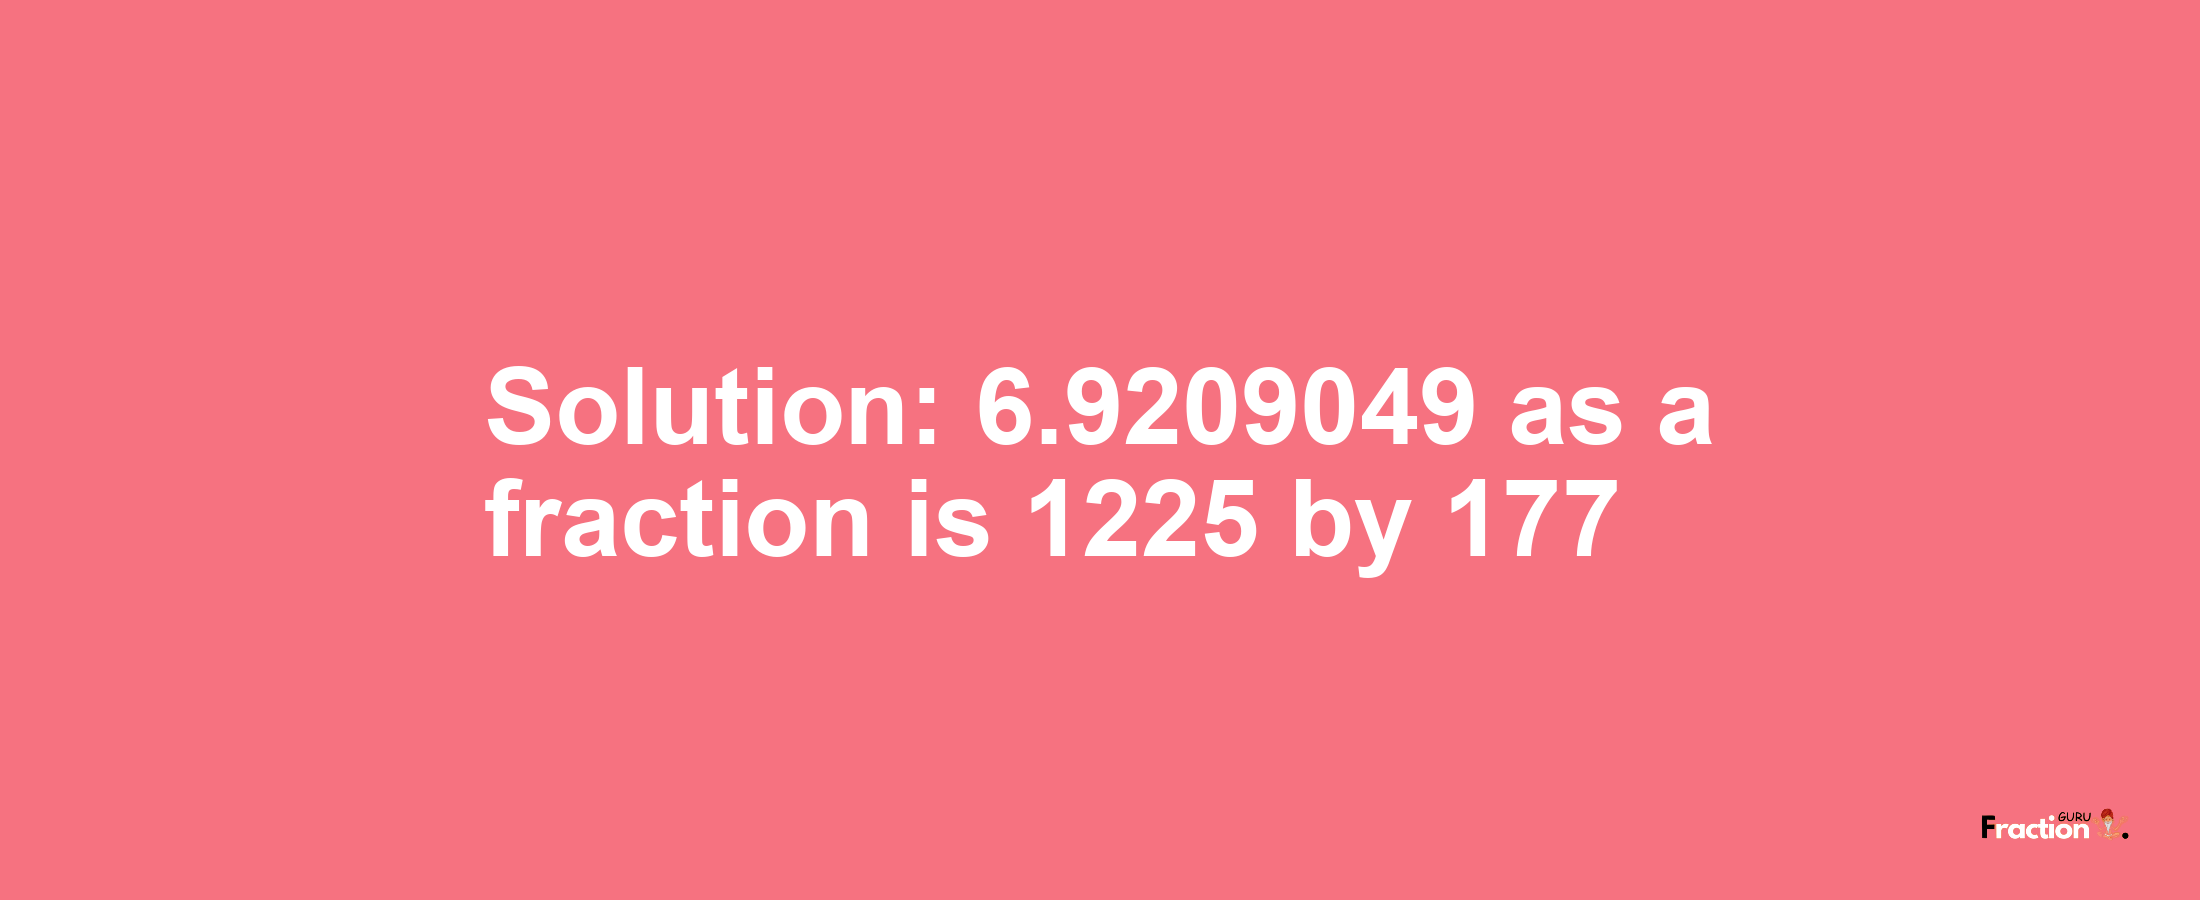 Solution:6.9209049 as a fraction is 1225/177